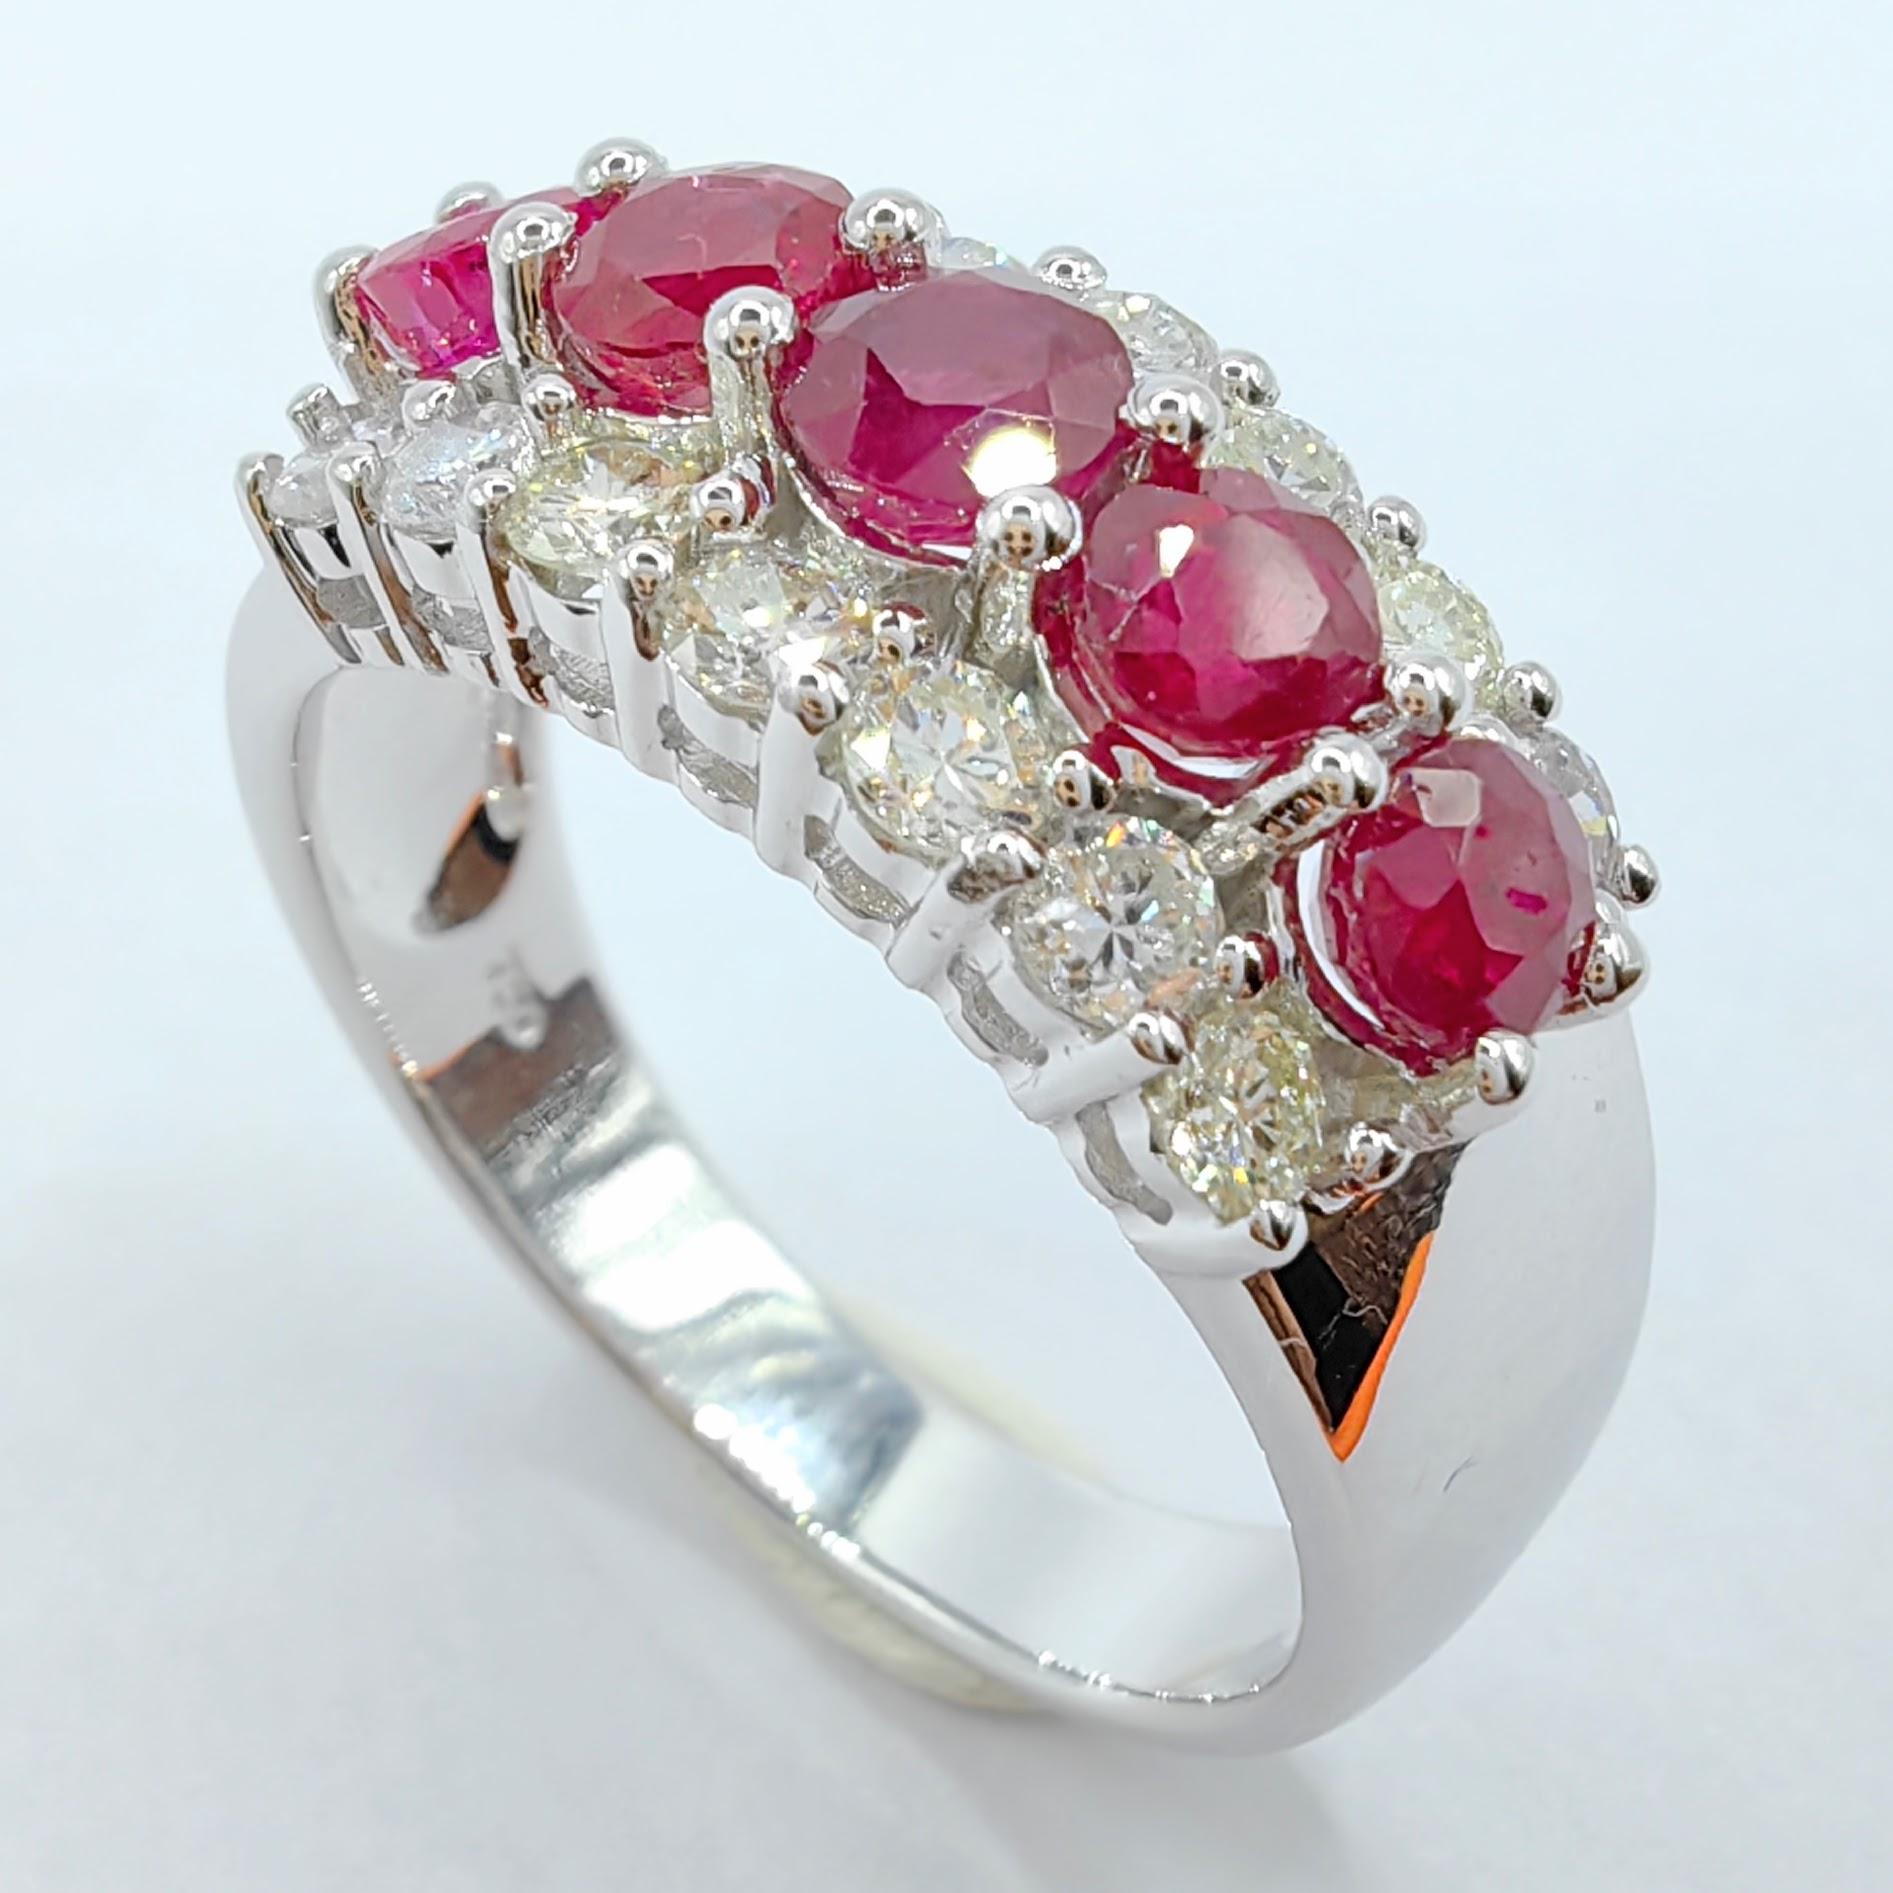 Introducing our exquisite 1.32 Carat Pigeon Blood Ruby & Diamond Half Eternity Ring, a stunning piece crafted in 18K white gold. This captivating ring showcases the mesmerizing beauty of rubies and diamonds, creating a luxurious and timeless